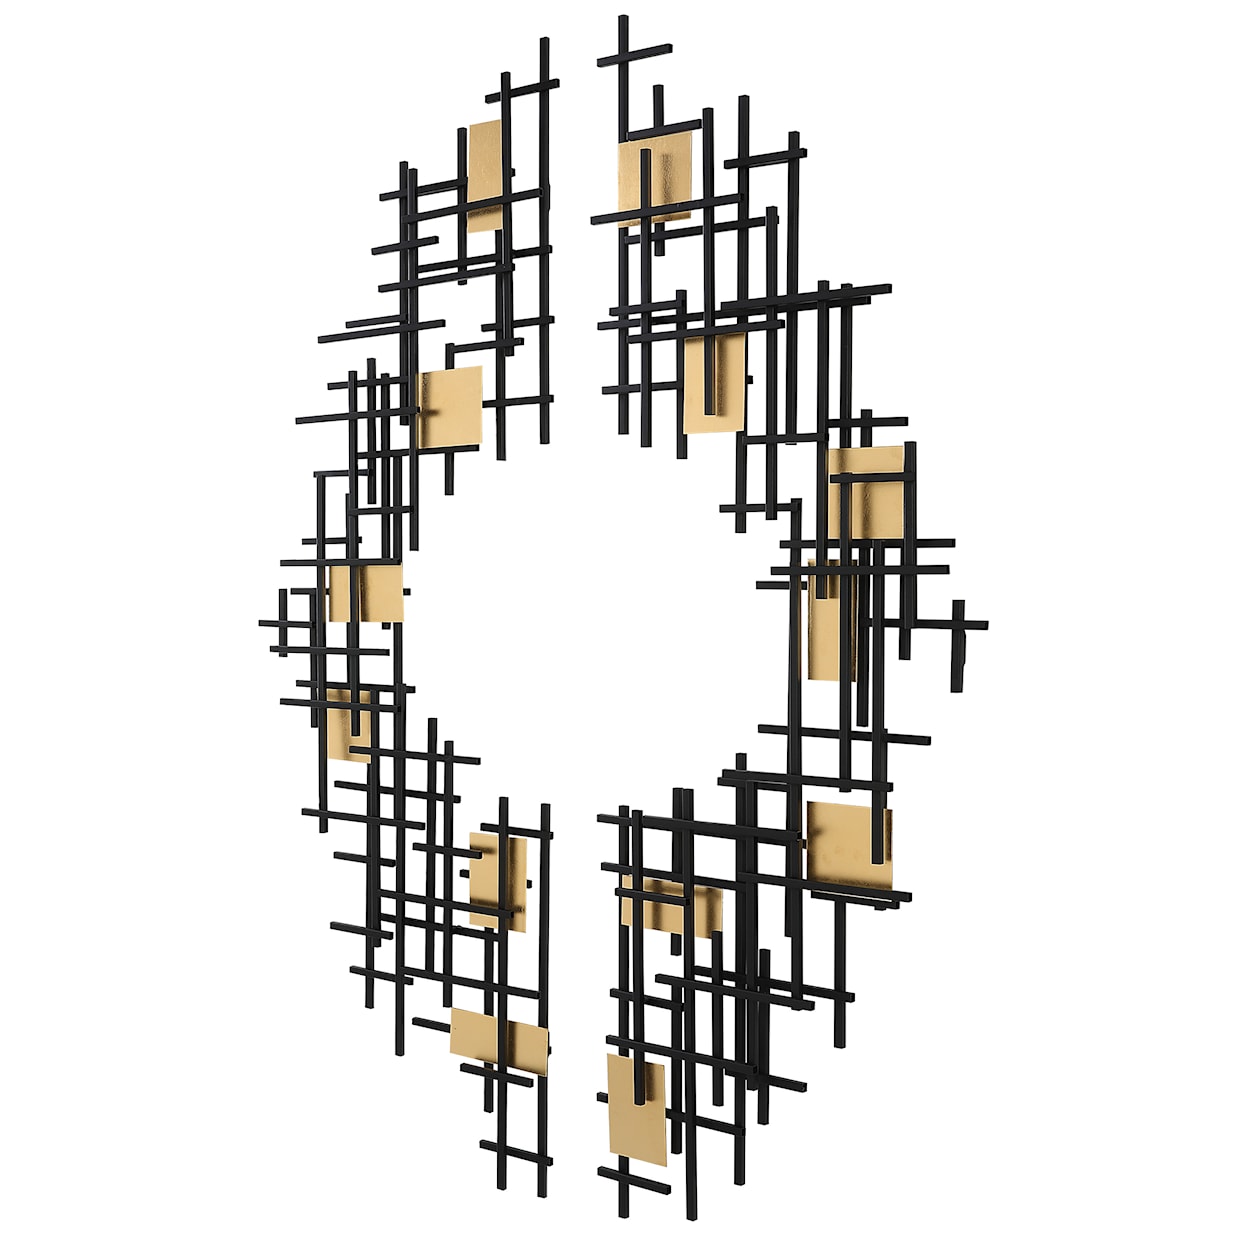 Uttermost Reflection Reflection Metal Grid Wall Decor S/2